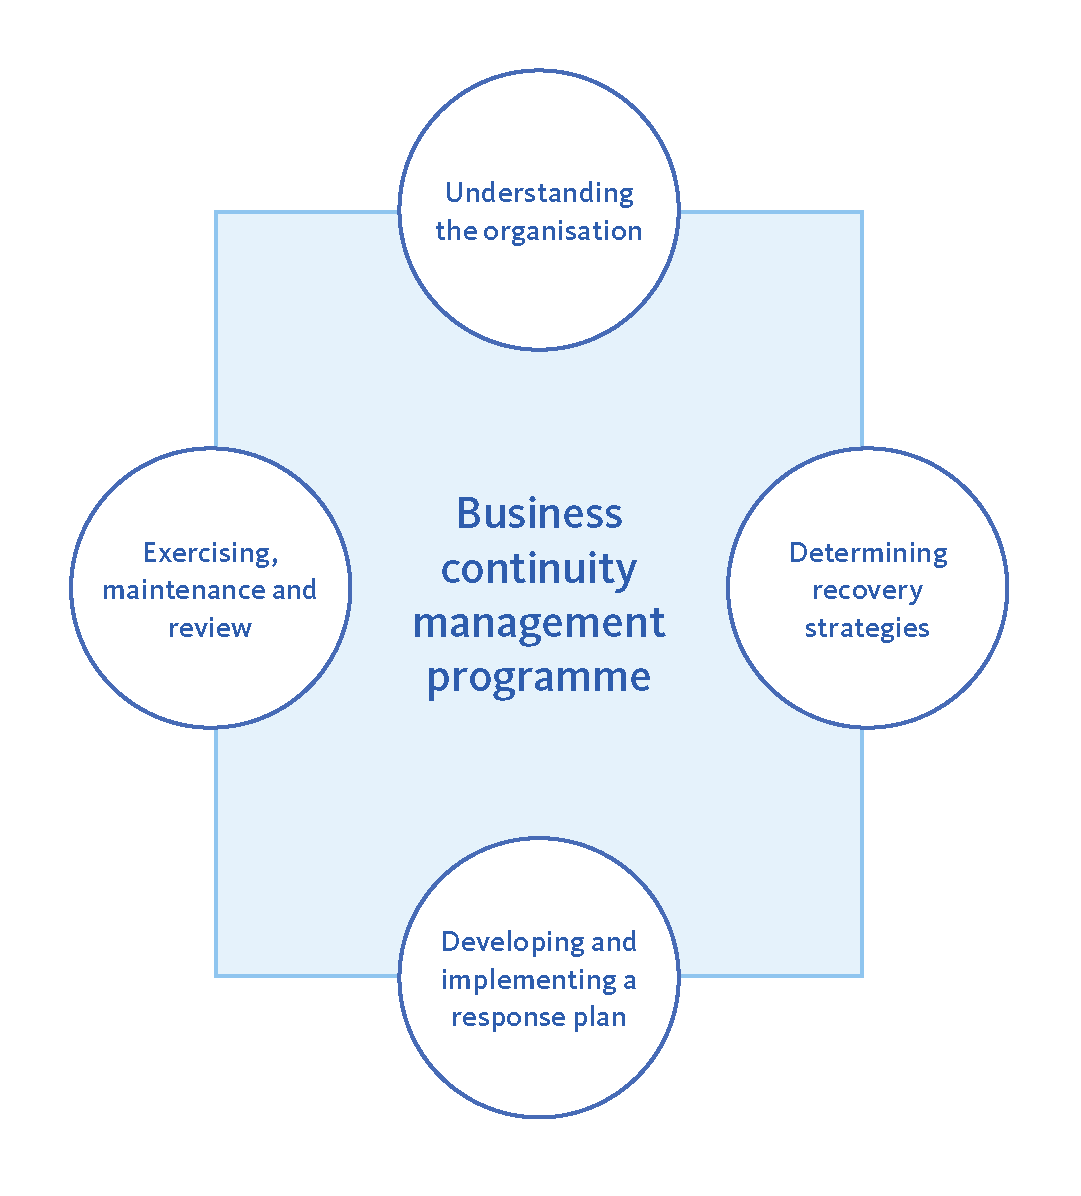 The business continuity management programme consists of the four themes understanding the organisation, determining recovery strategies, developing and implementing a response plan as well as exercising, maintenance and review.